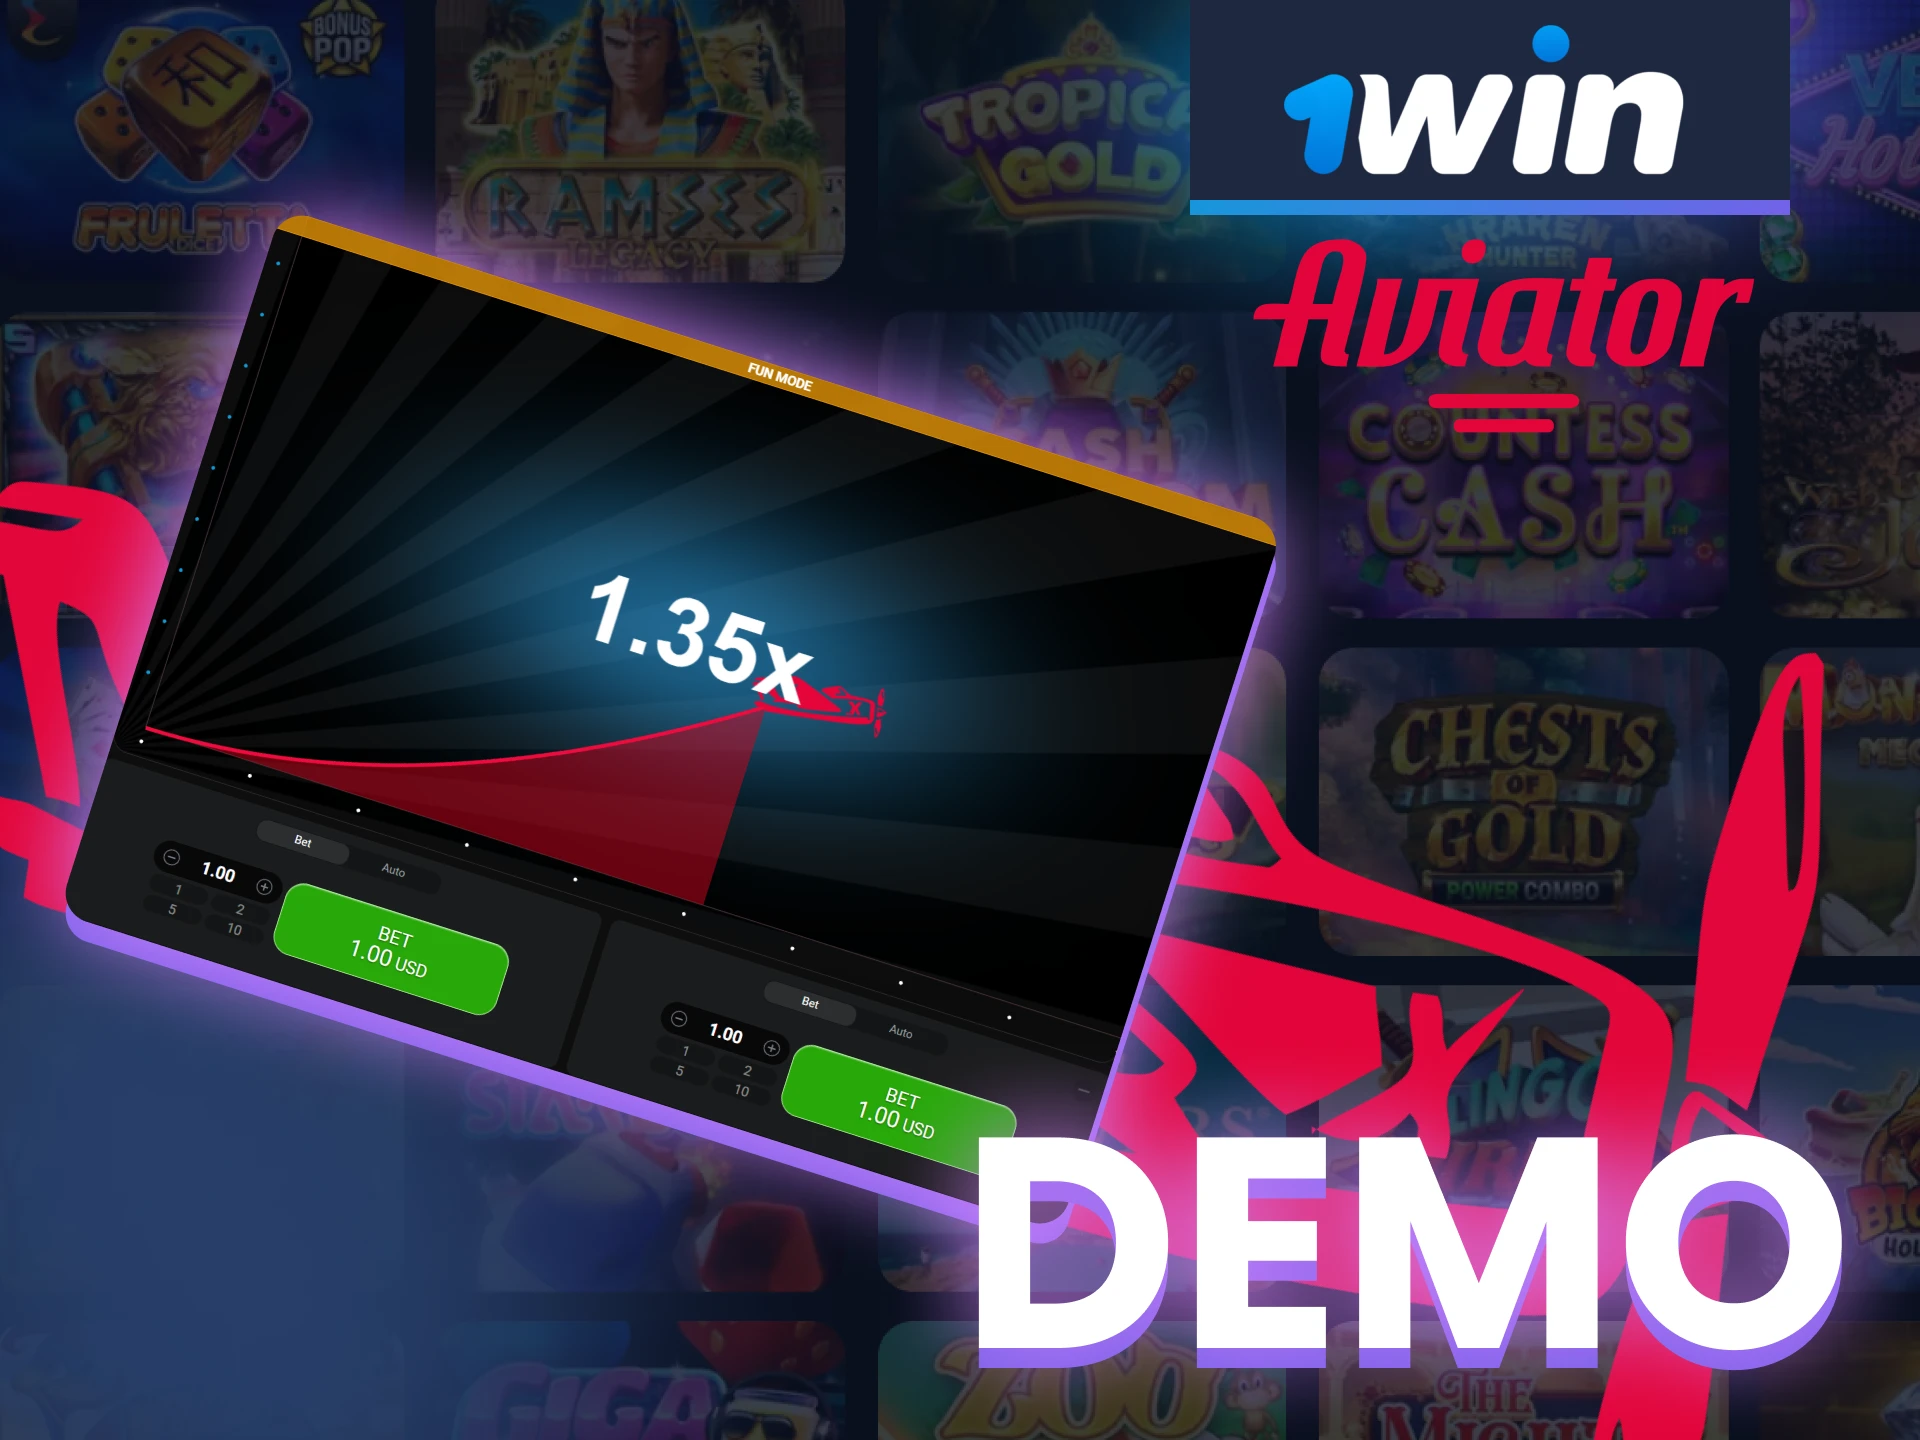 Practice in the 1win Aviator demo mode for free.